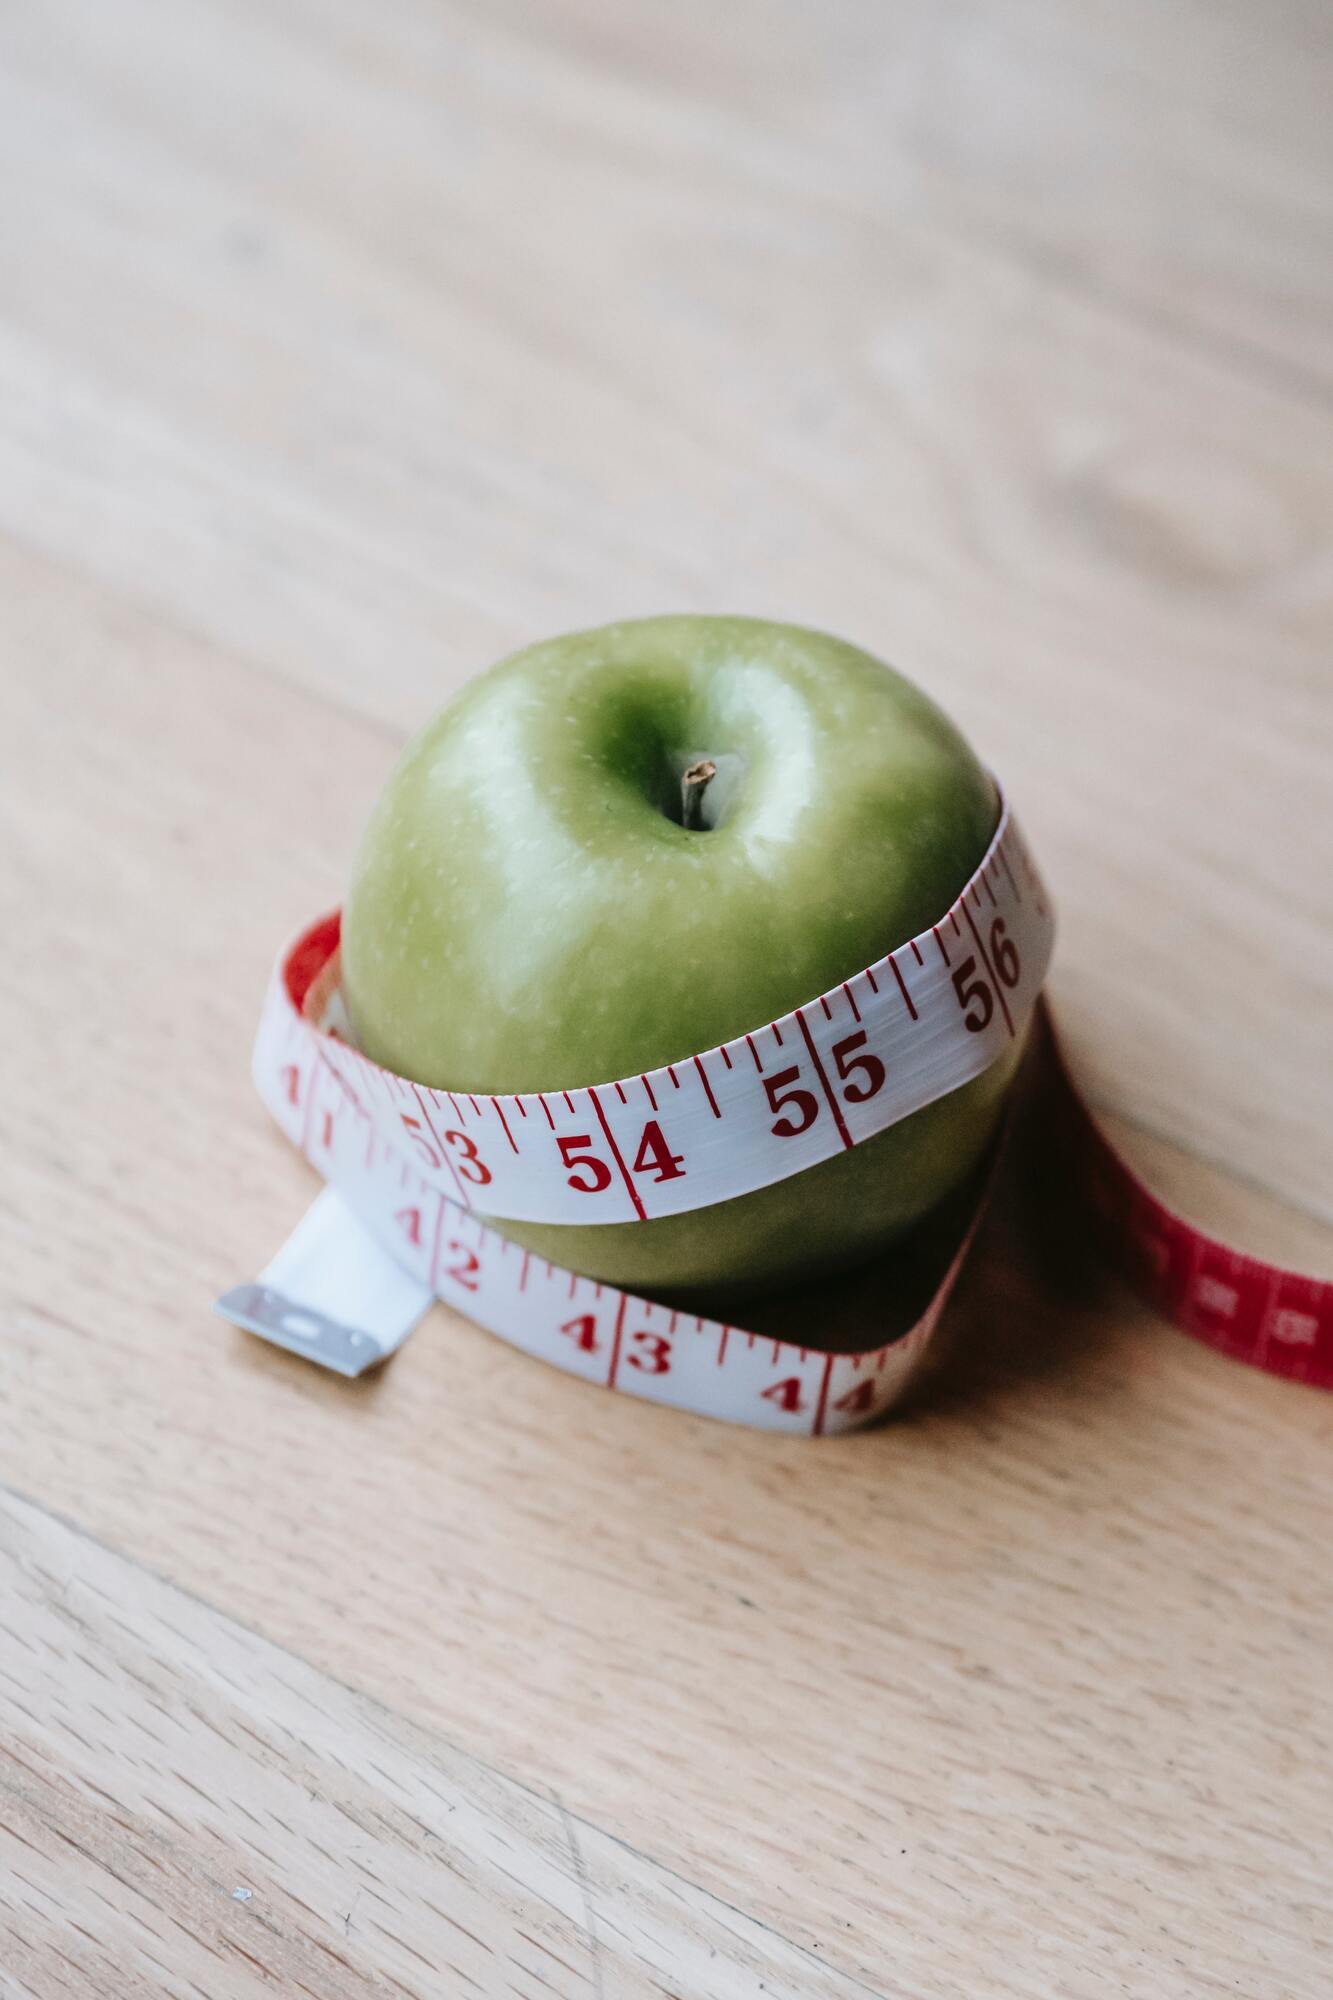 What popular diets to beware of and what weight loss experiments can lead to